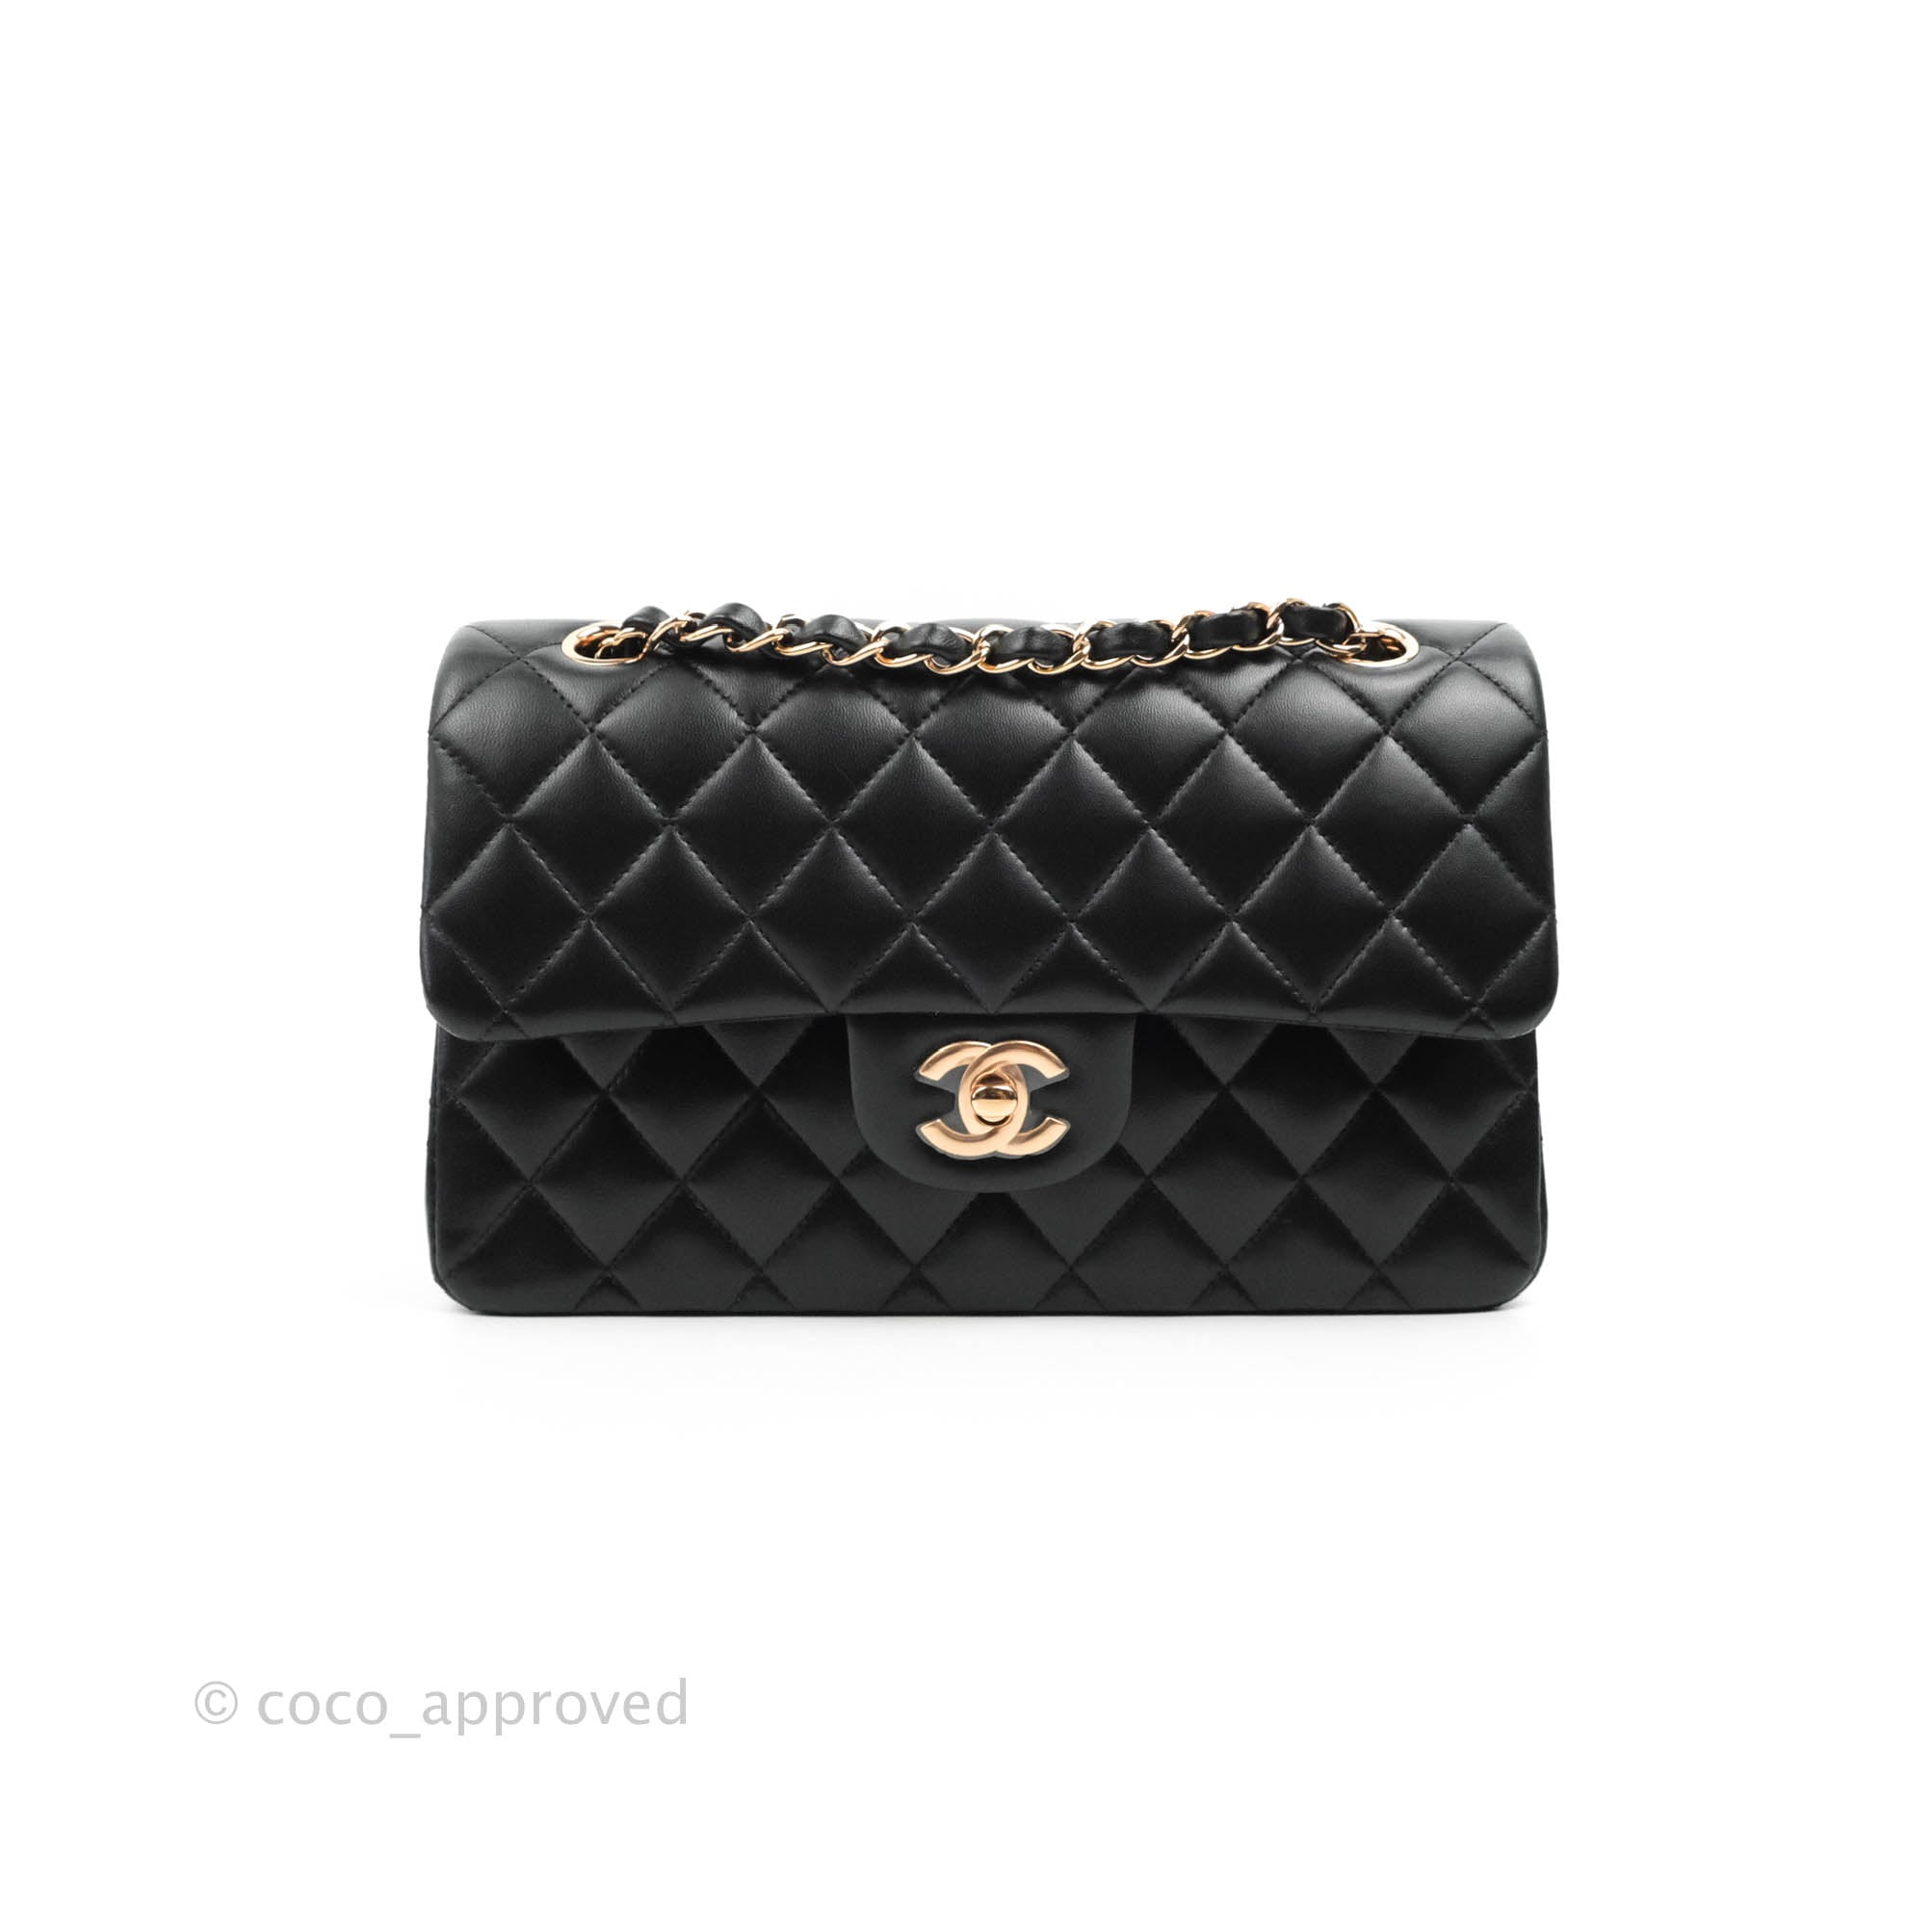 Shopping with Emmy: Chanel Pink Rose Gold Mini Classic Flap Bag